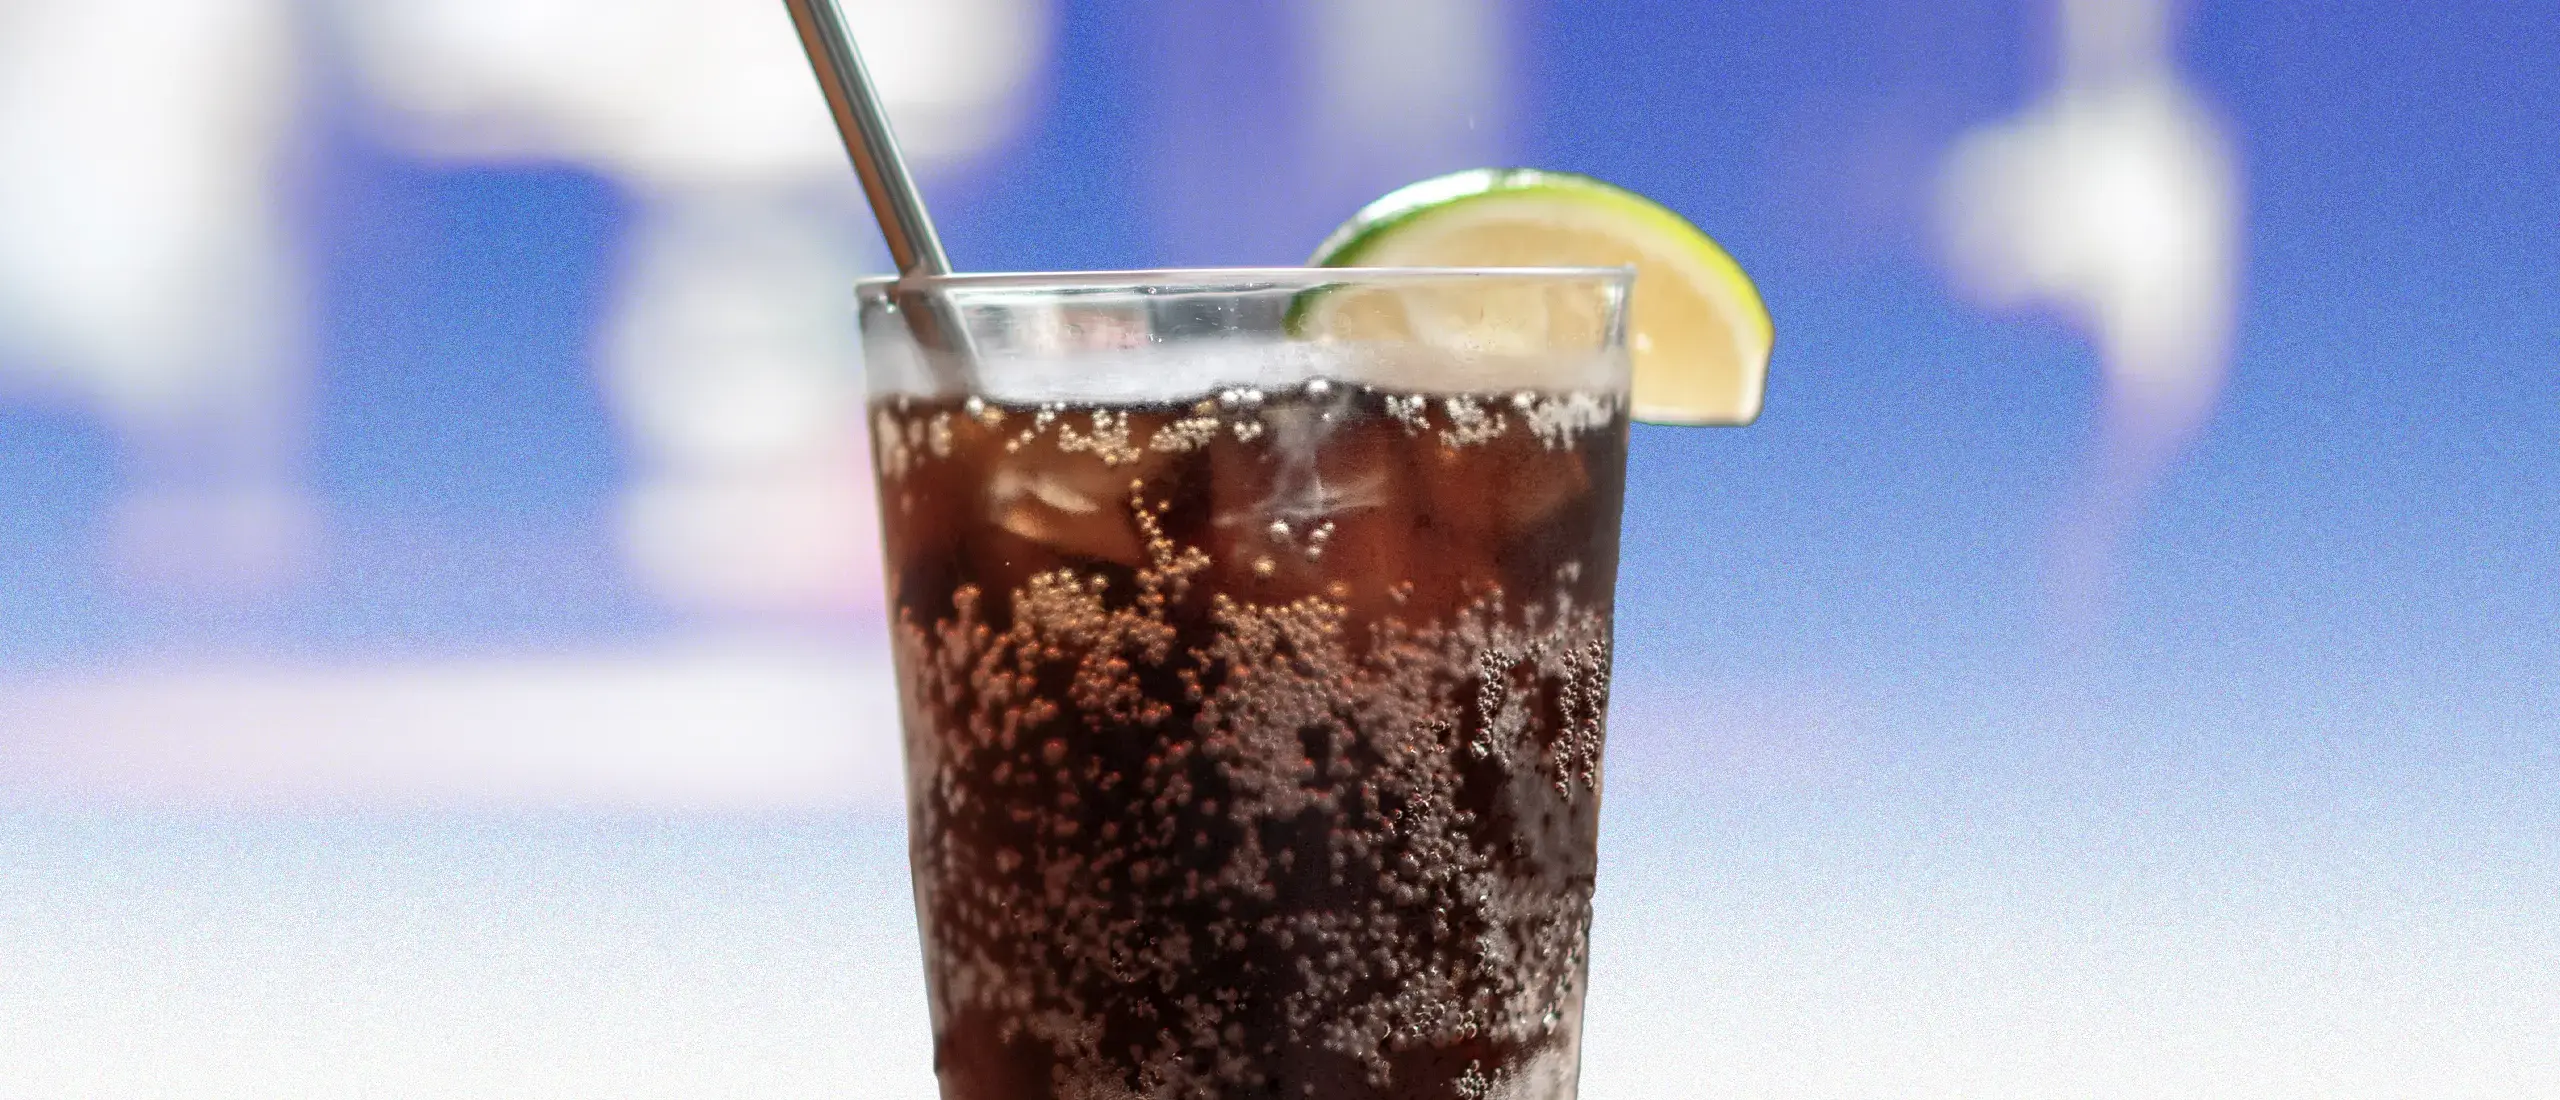 A glass of diet soda